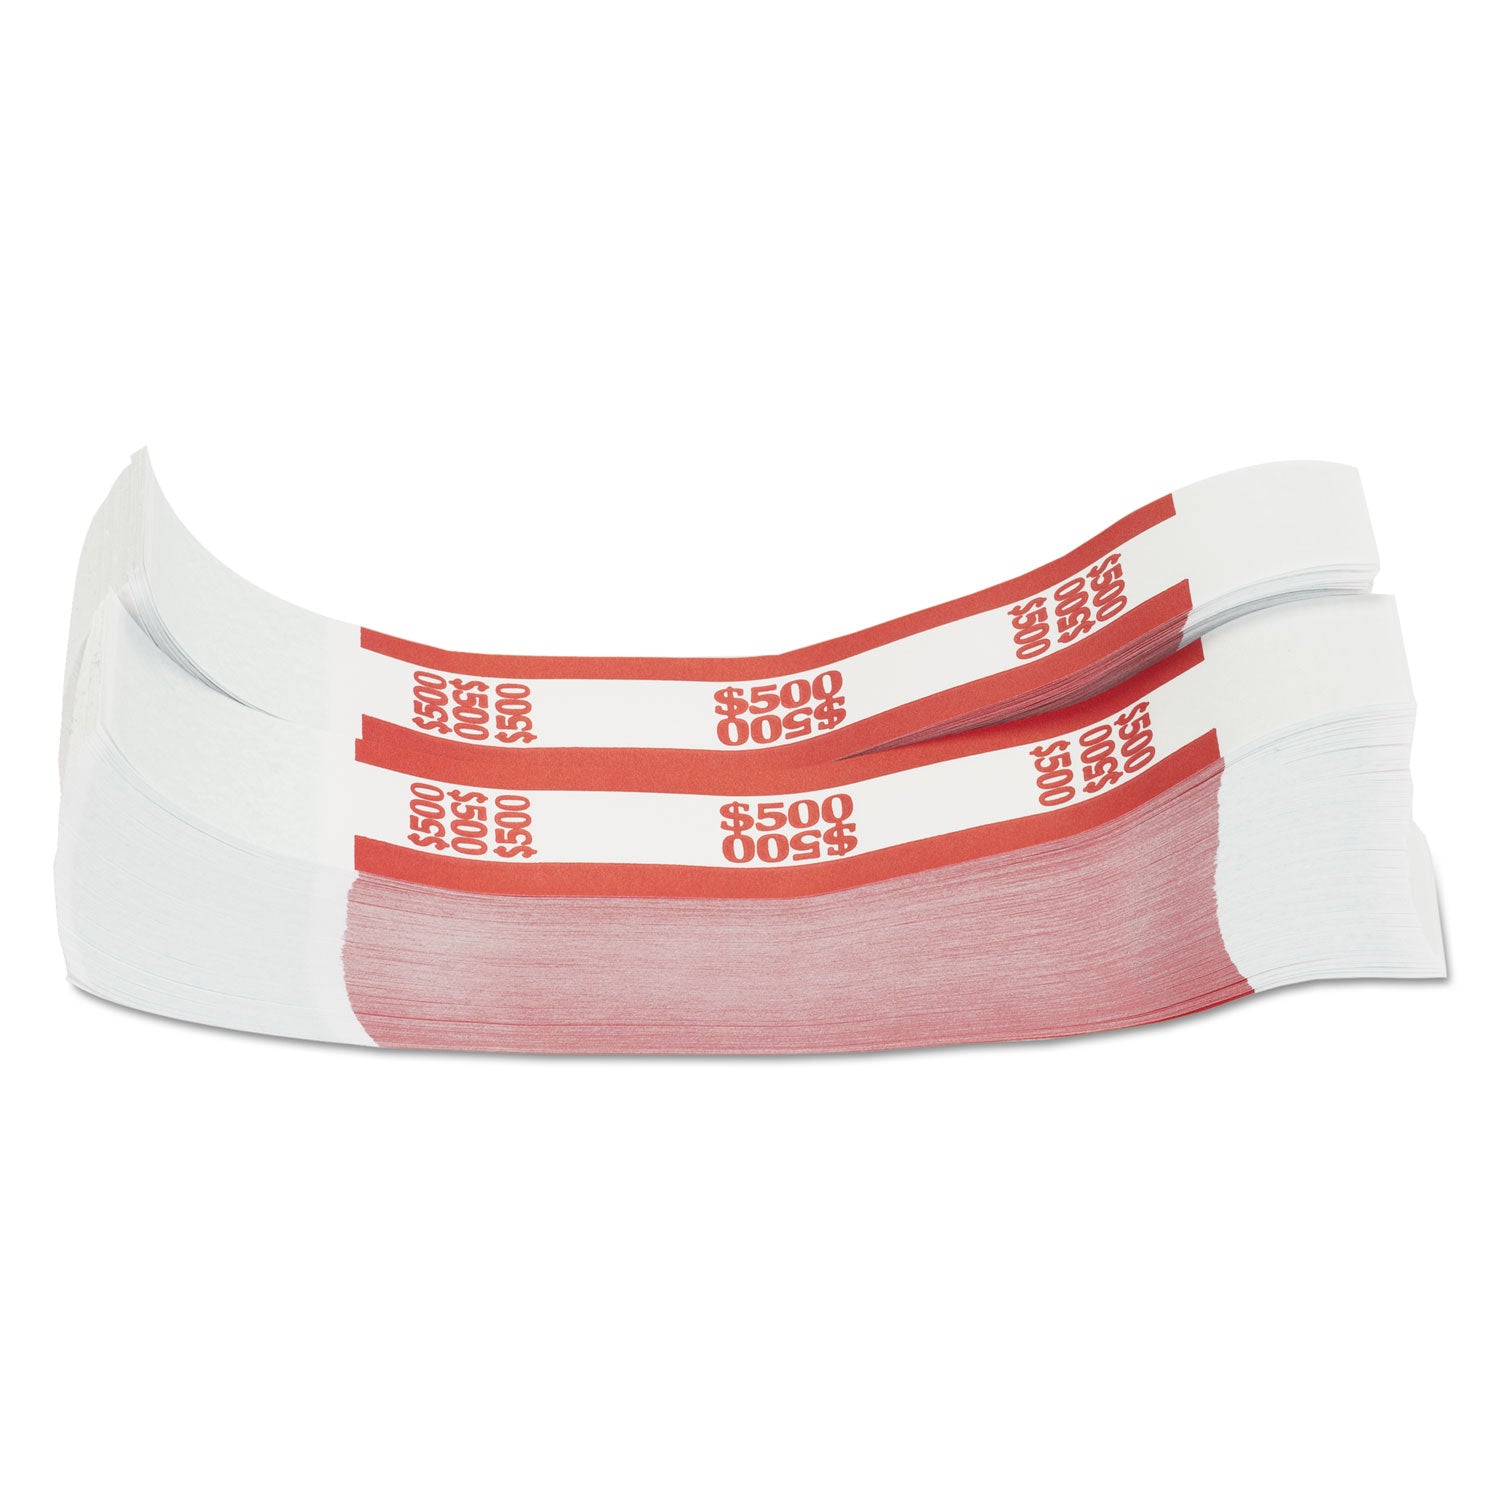 Currency Straps, Red, $500 in $5 Bills, 1000 Bands/Pack - 